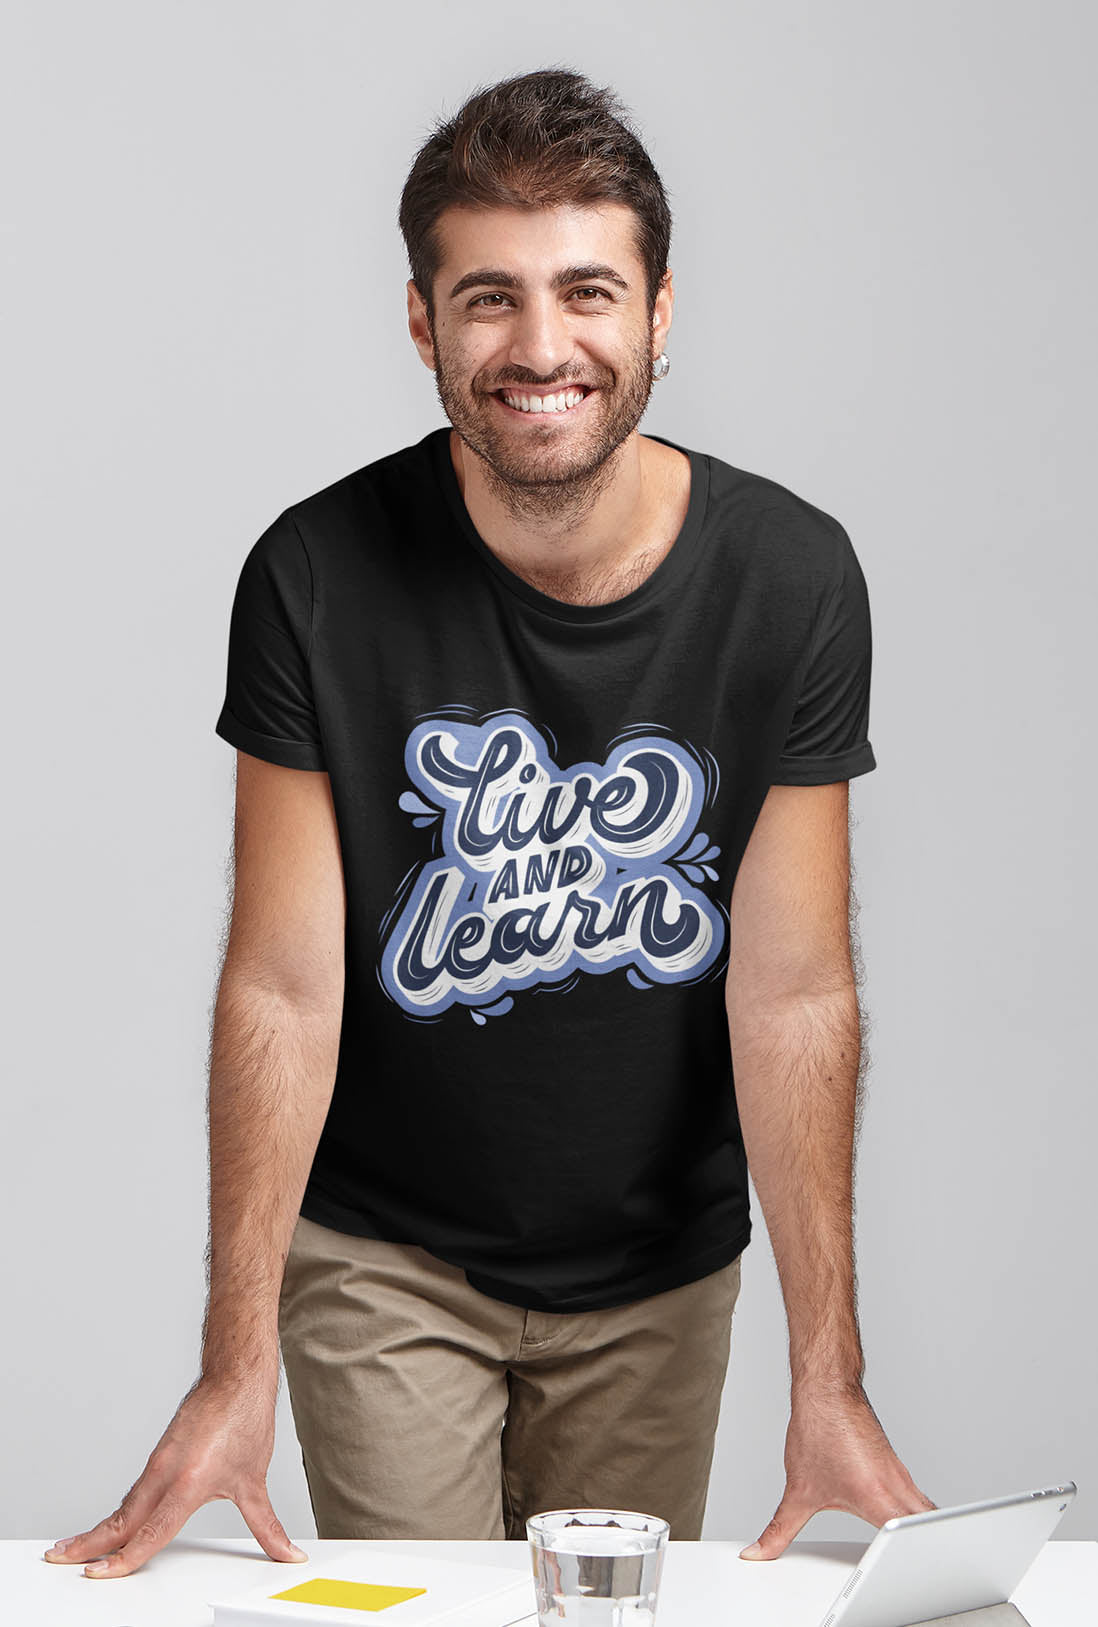 Live And Learn Men's Cotton T-Shirt